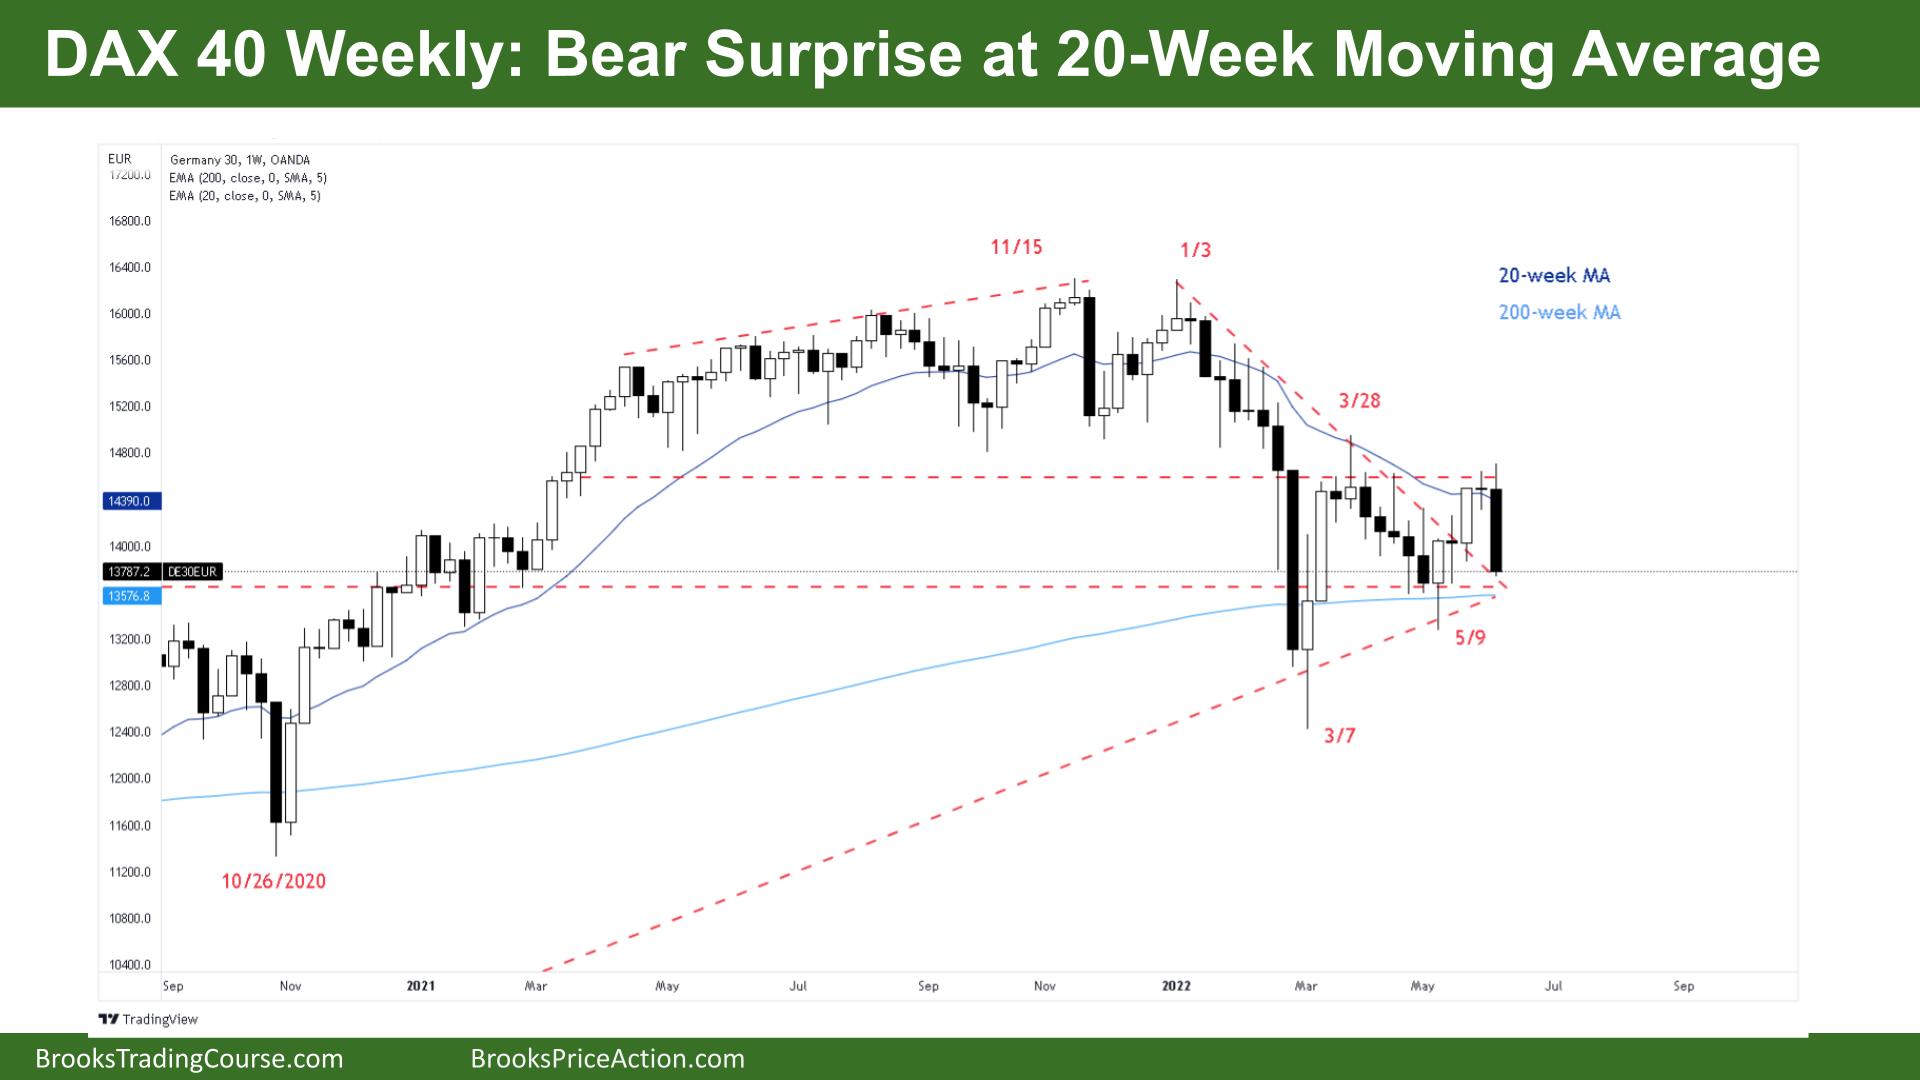 DAX 40 Bear Surprise at 20 Week Moving Average on Weekly Chart